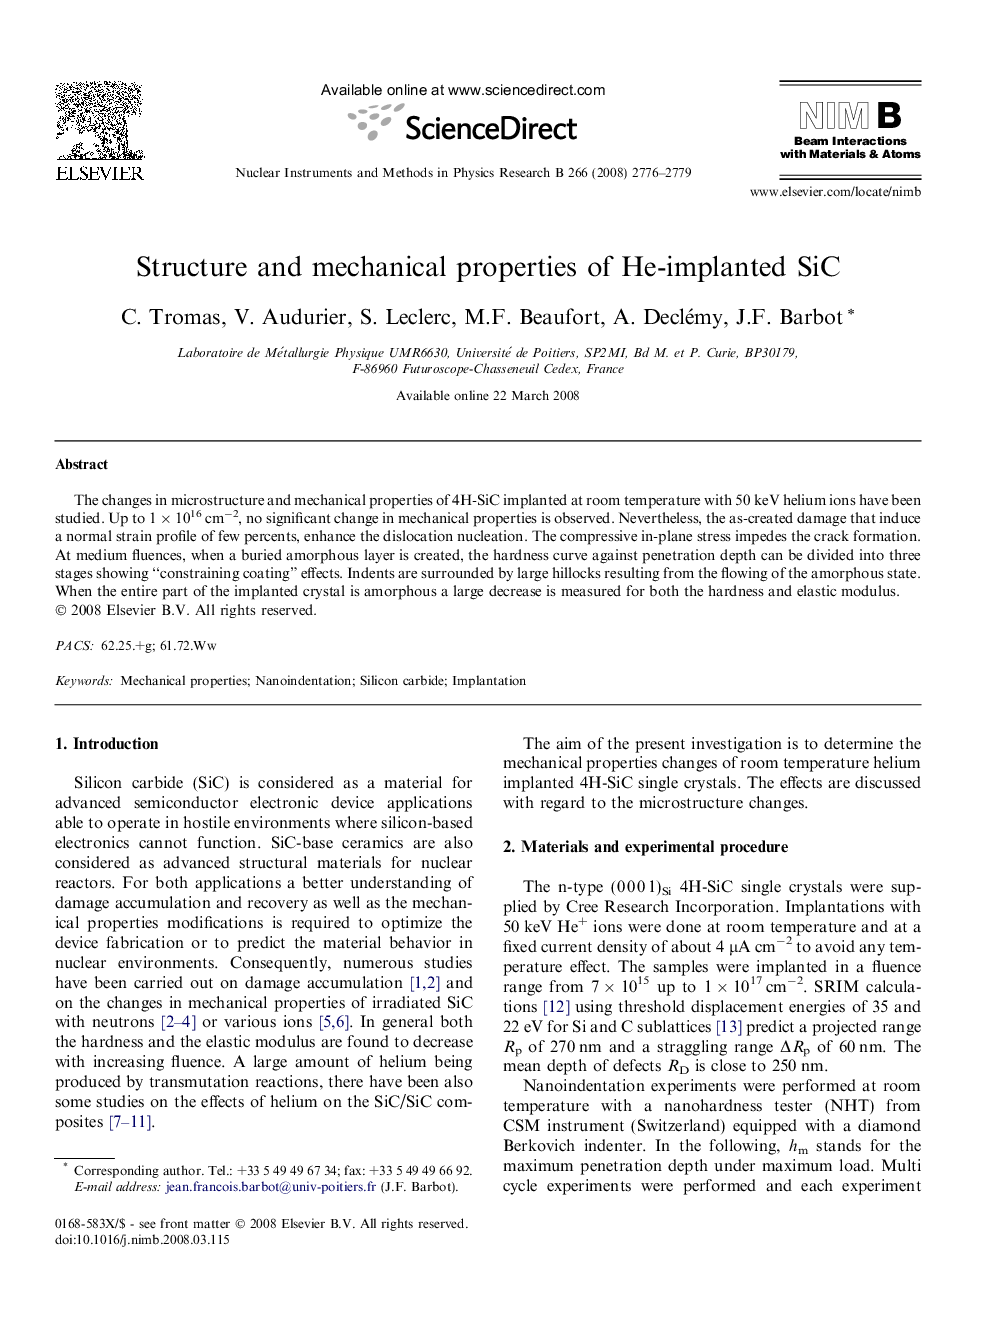 Structure and mechanical properties of He-implanted SiC